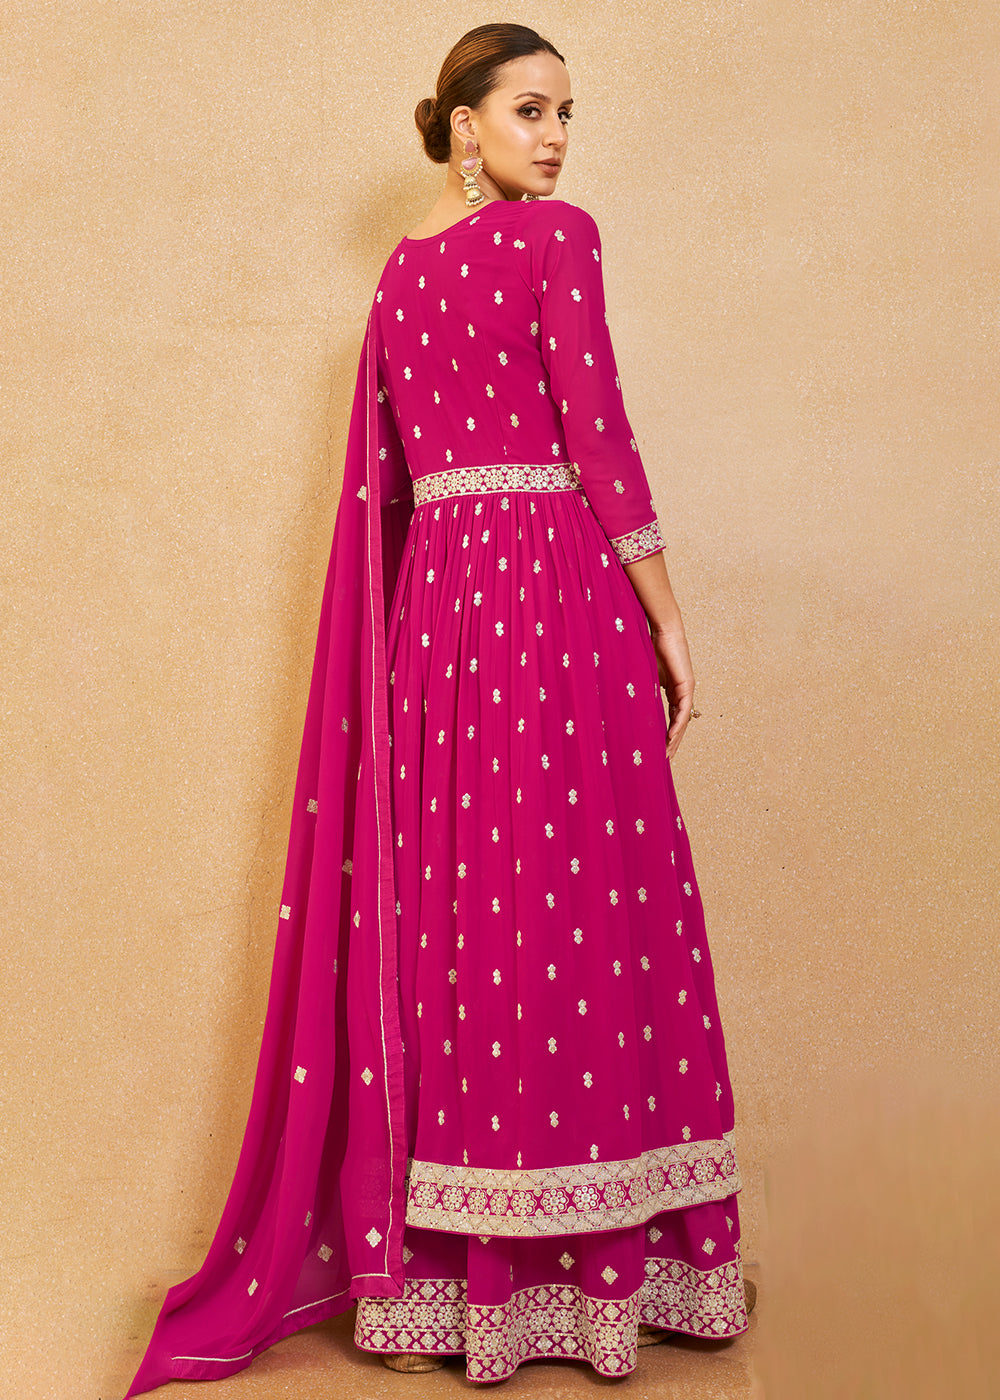 Buy Now Supreme Hot Pink Real Georgette Palazzo Style Salwar Suit Online in USA, UK, Canada, Germany, Australia & Worldwide at Empress Clothing.